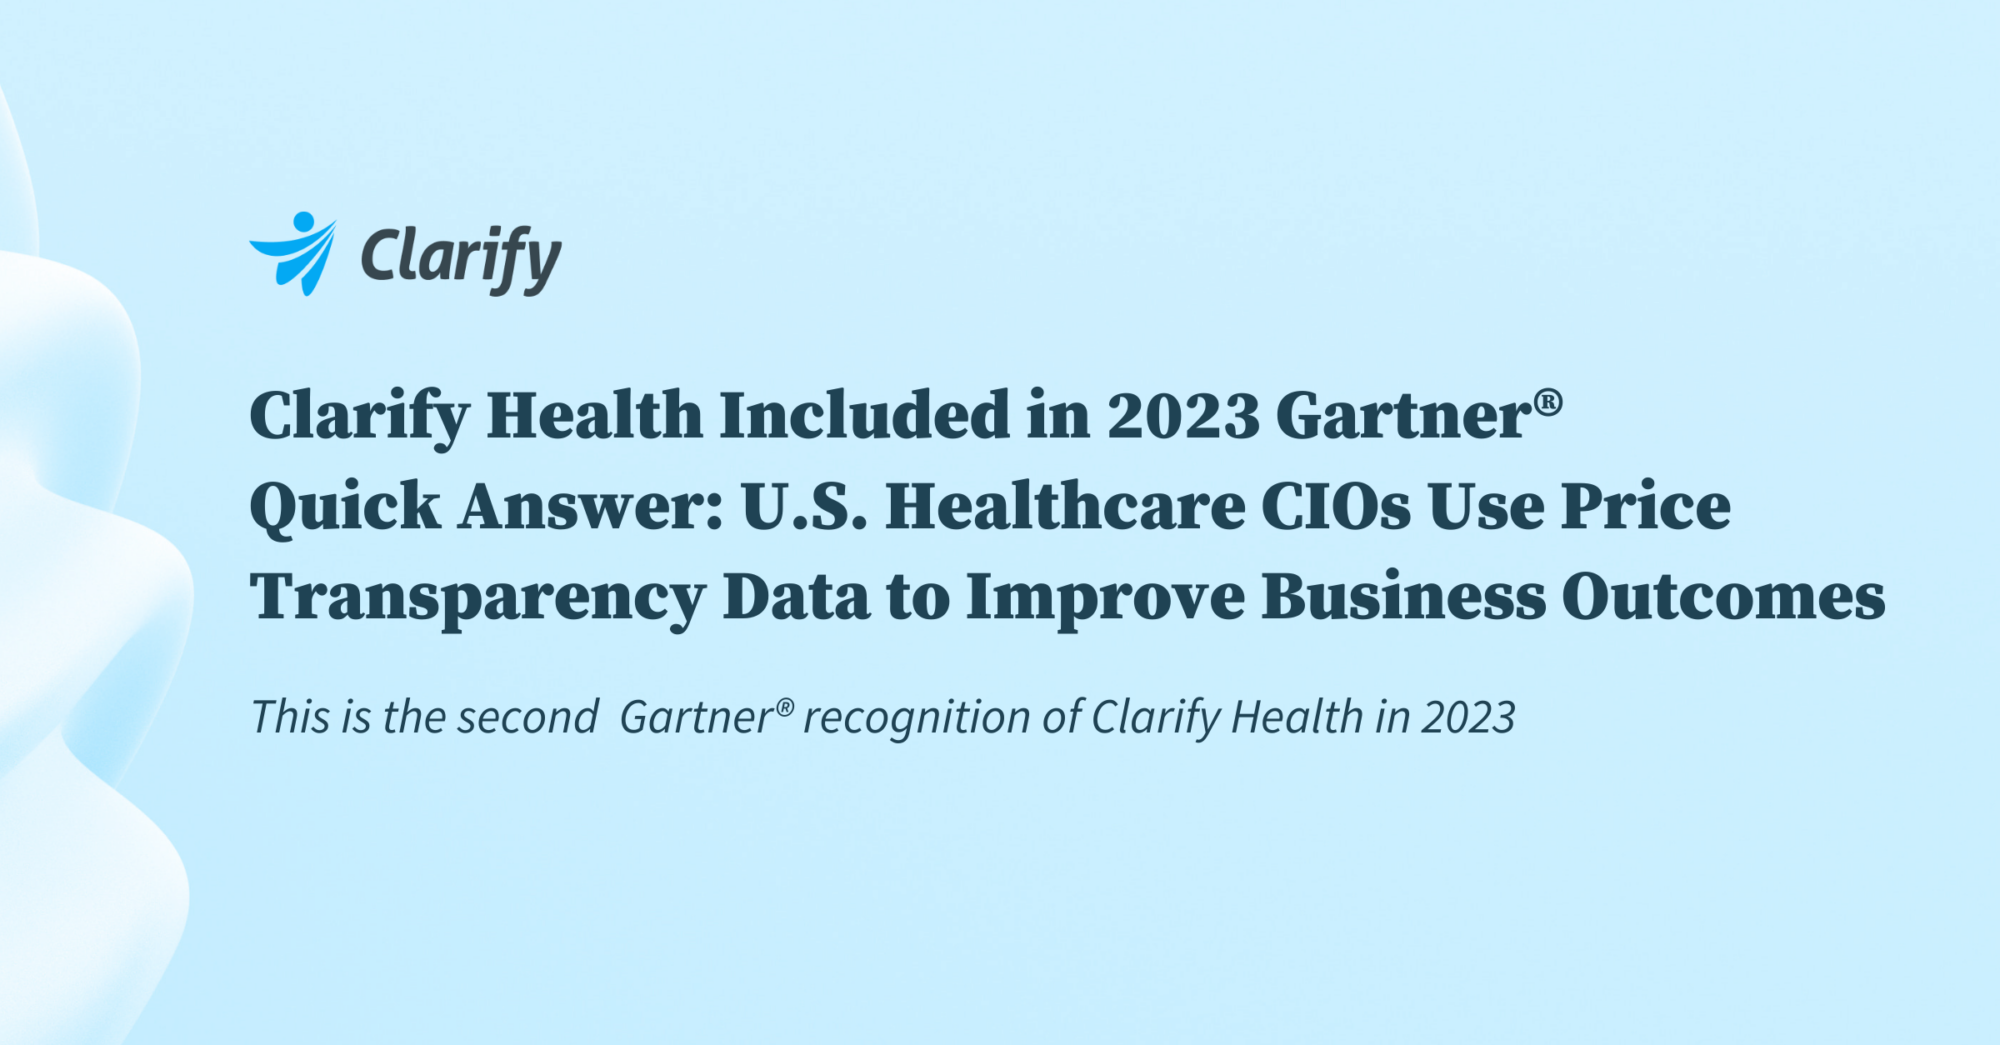 Thumbnail for Clarify Health Included in 2023 Gartner® Quick Answer: U.S. Healthcare CIOs Use Price Transparency Data to Improve Business Outcomes